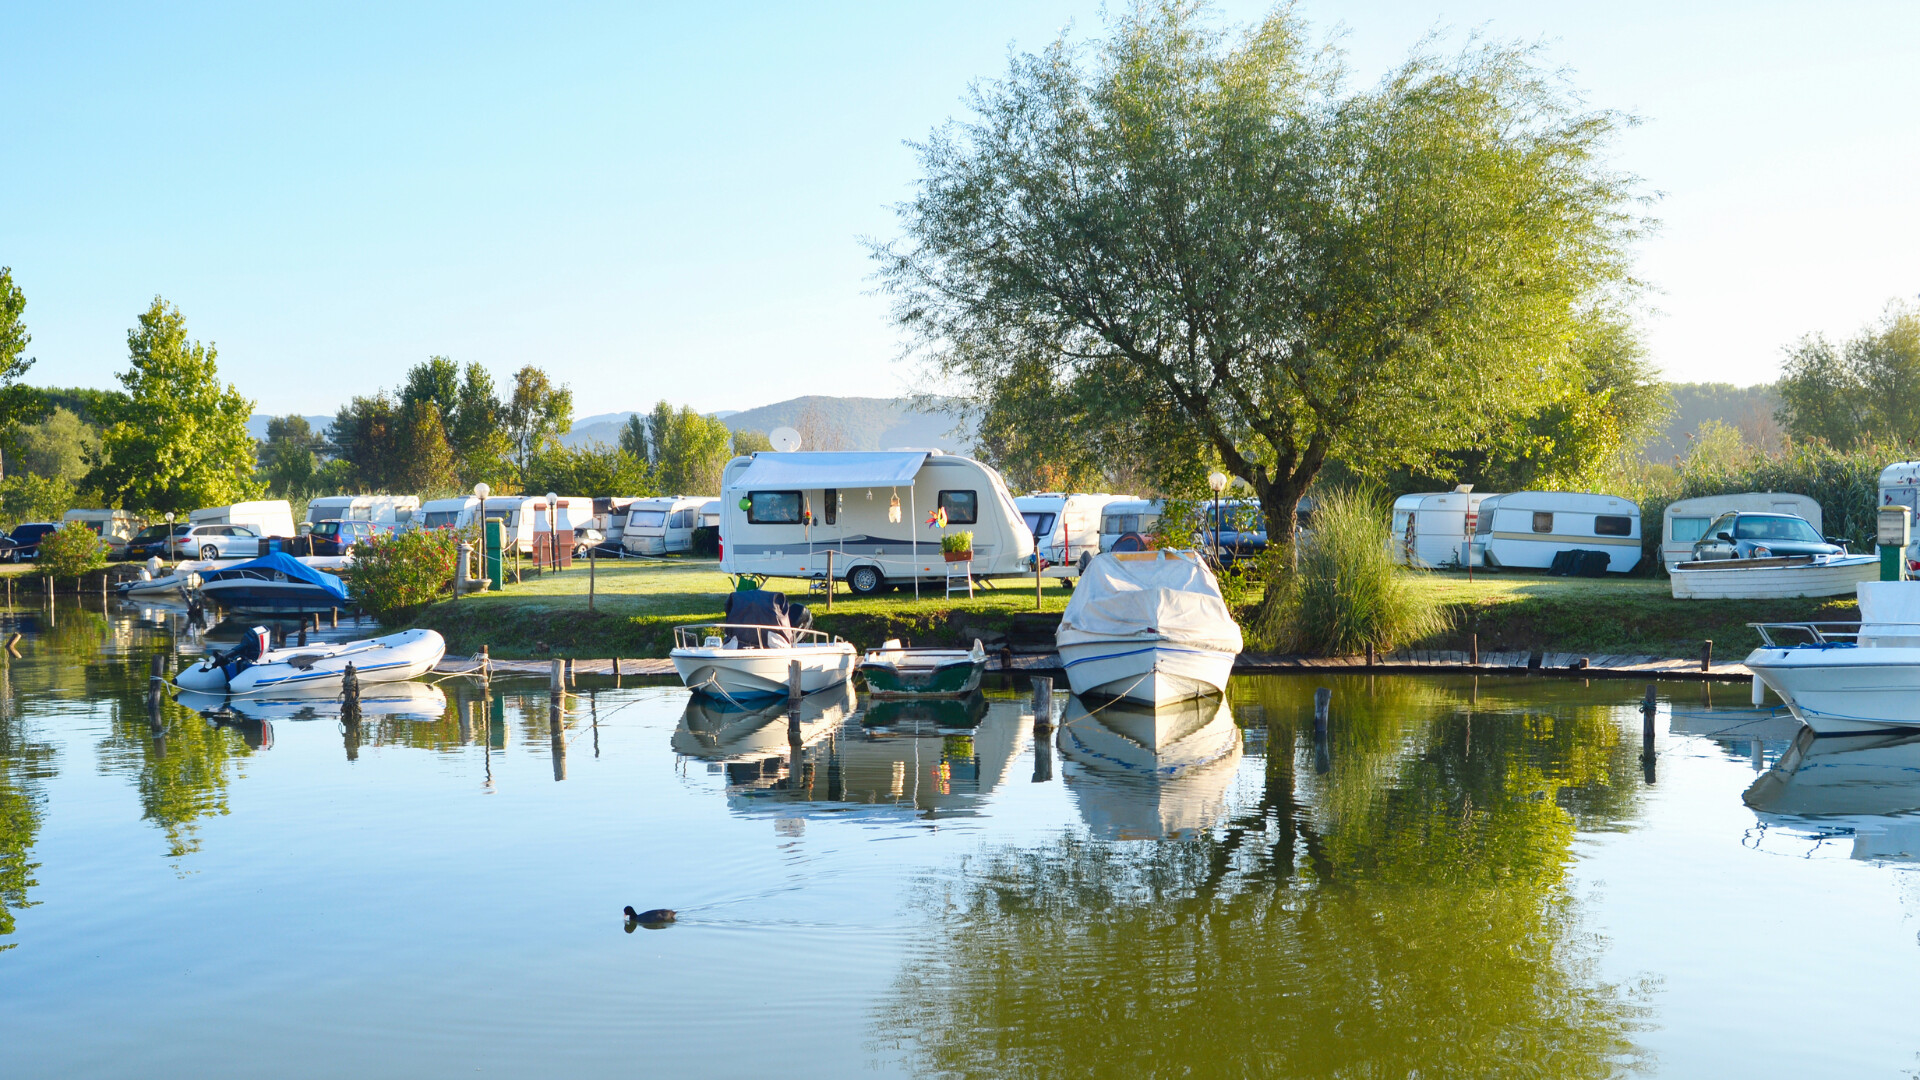 Unique Campsite Amenities Uninsurable by Traditional Policies